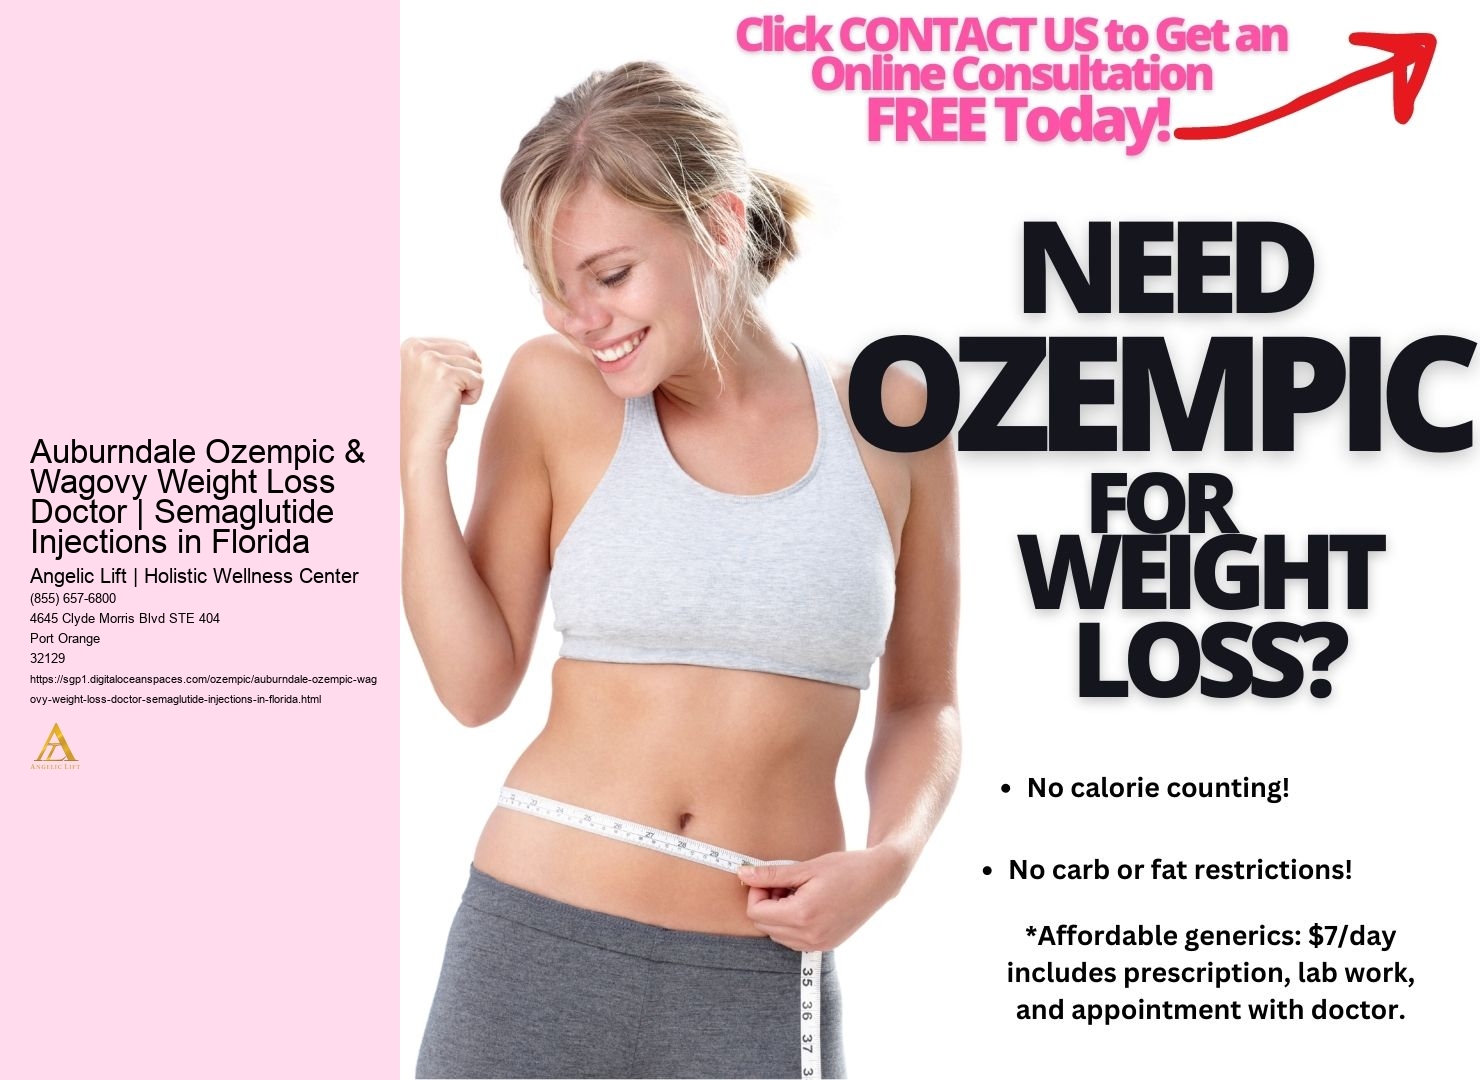 Auburndale Ozempic & Wagovy Weight Loss Doctor | Semaglutide Injections in Florida